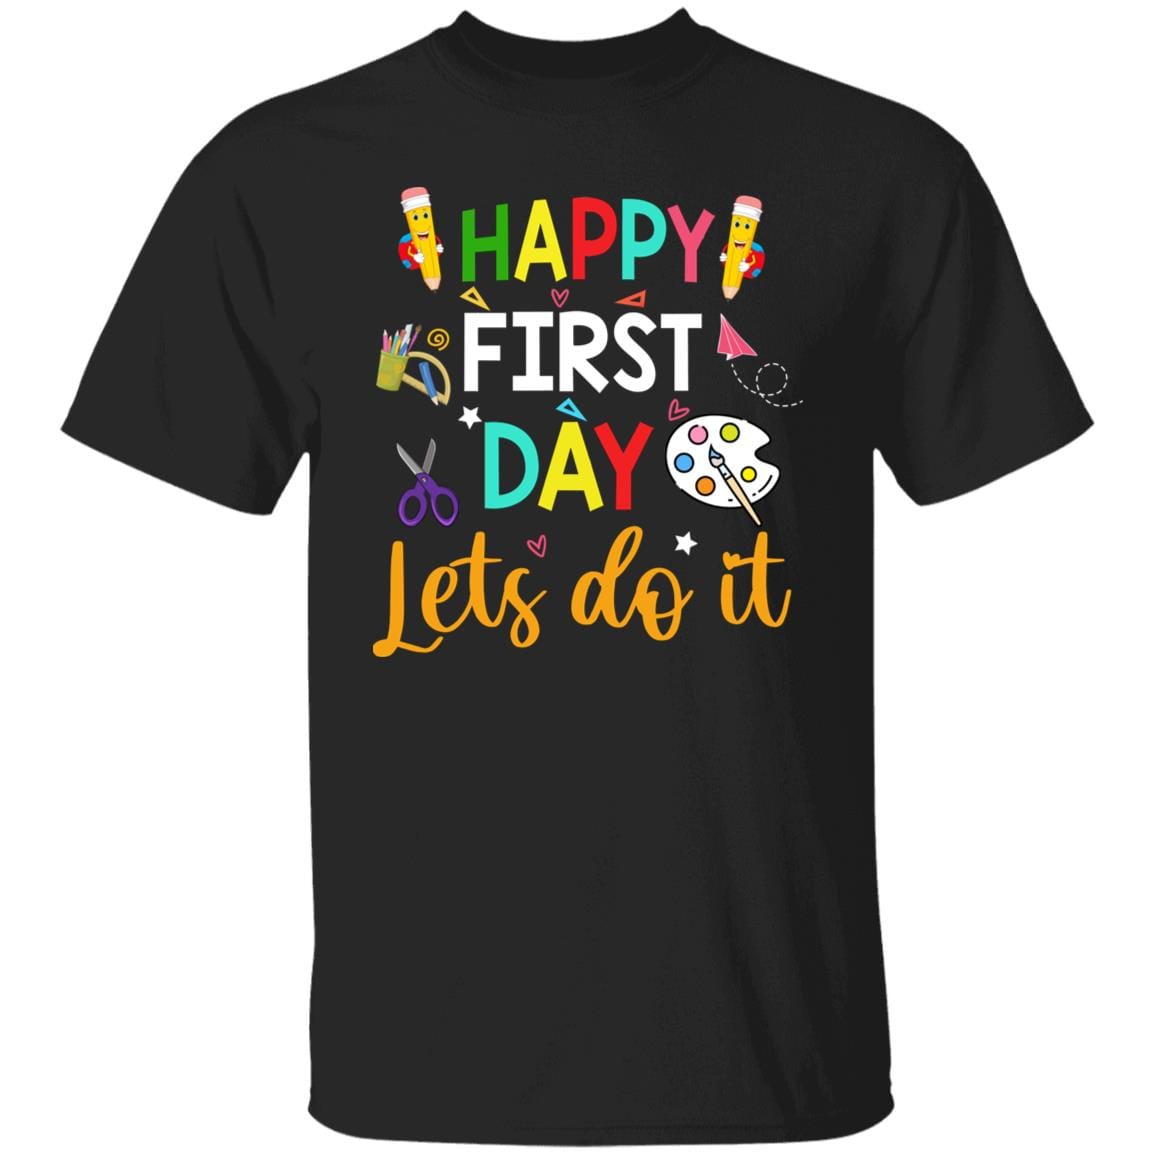 GeckoCustom Happy First Day Lets Do It Shirt H426 Basic Tee / Black / S